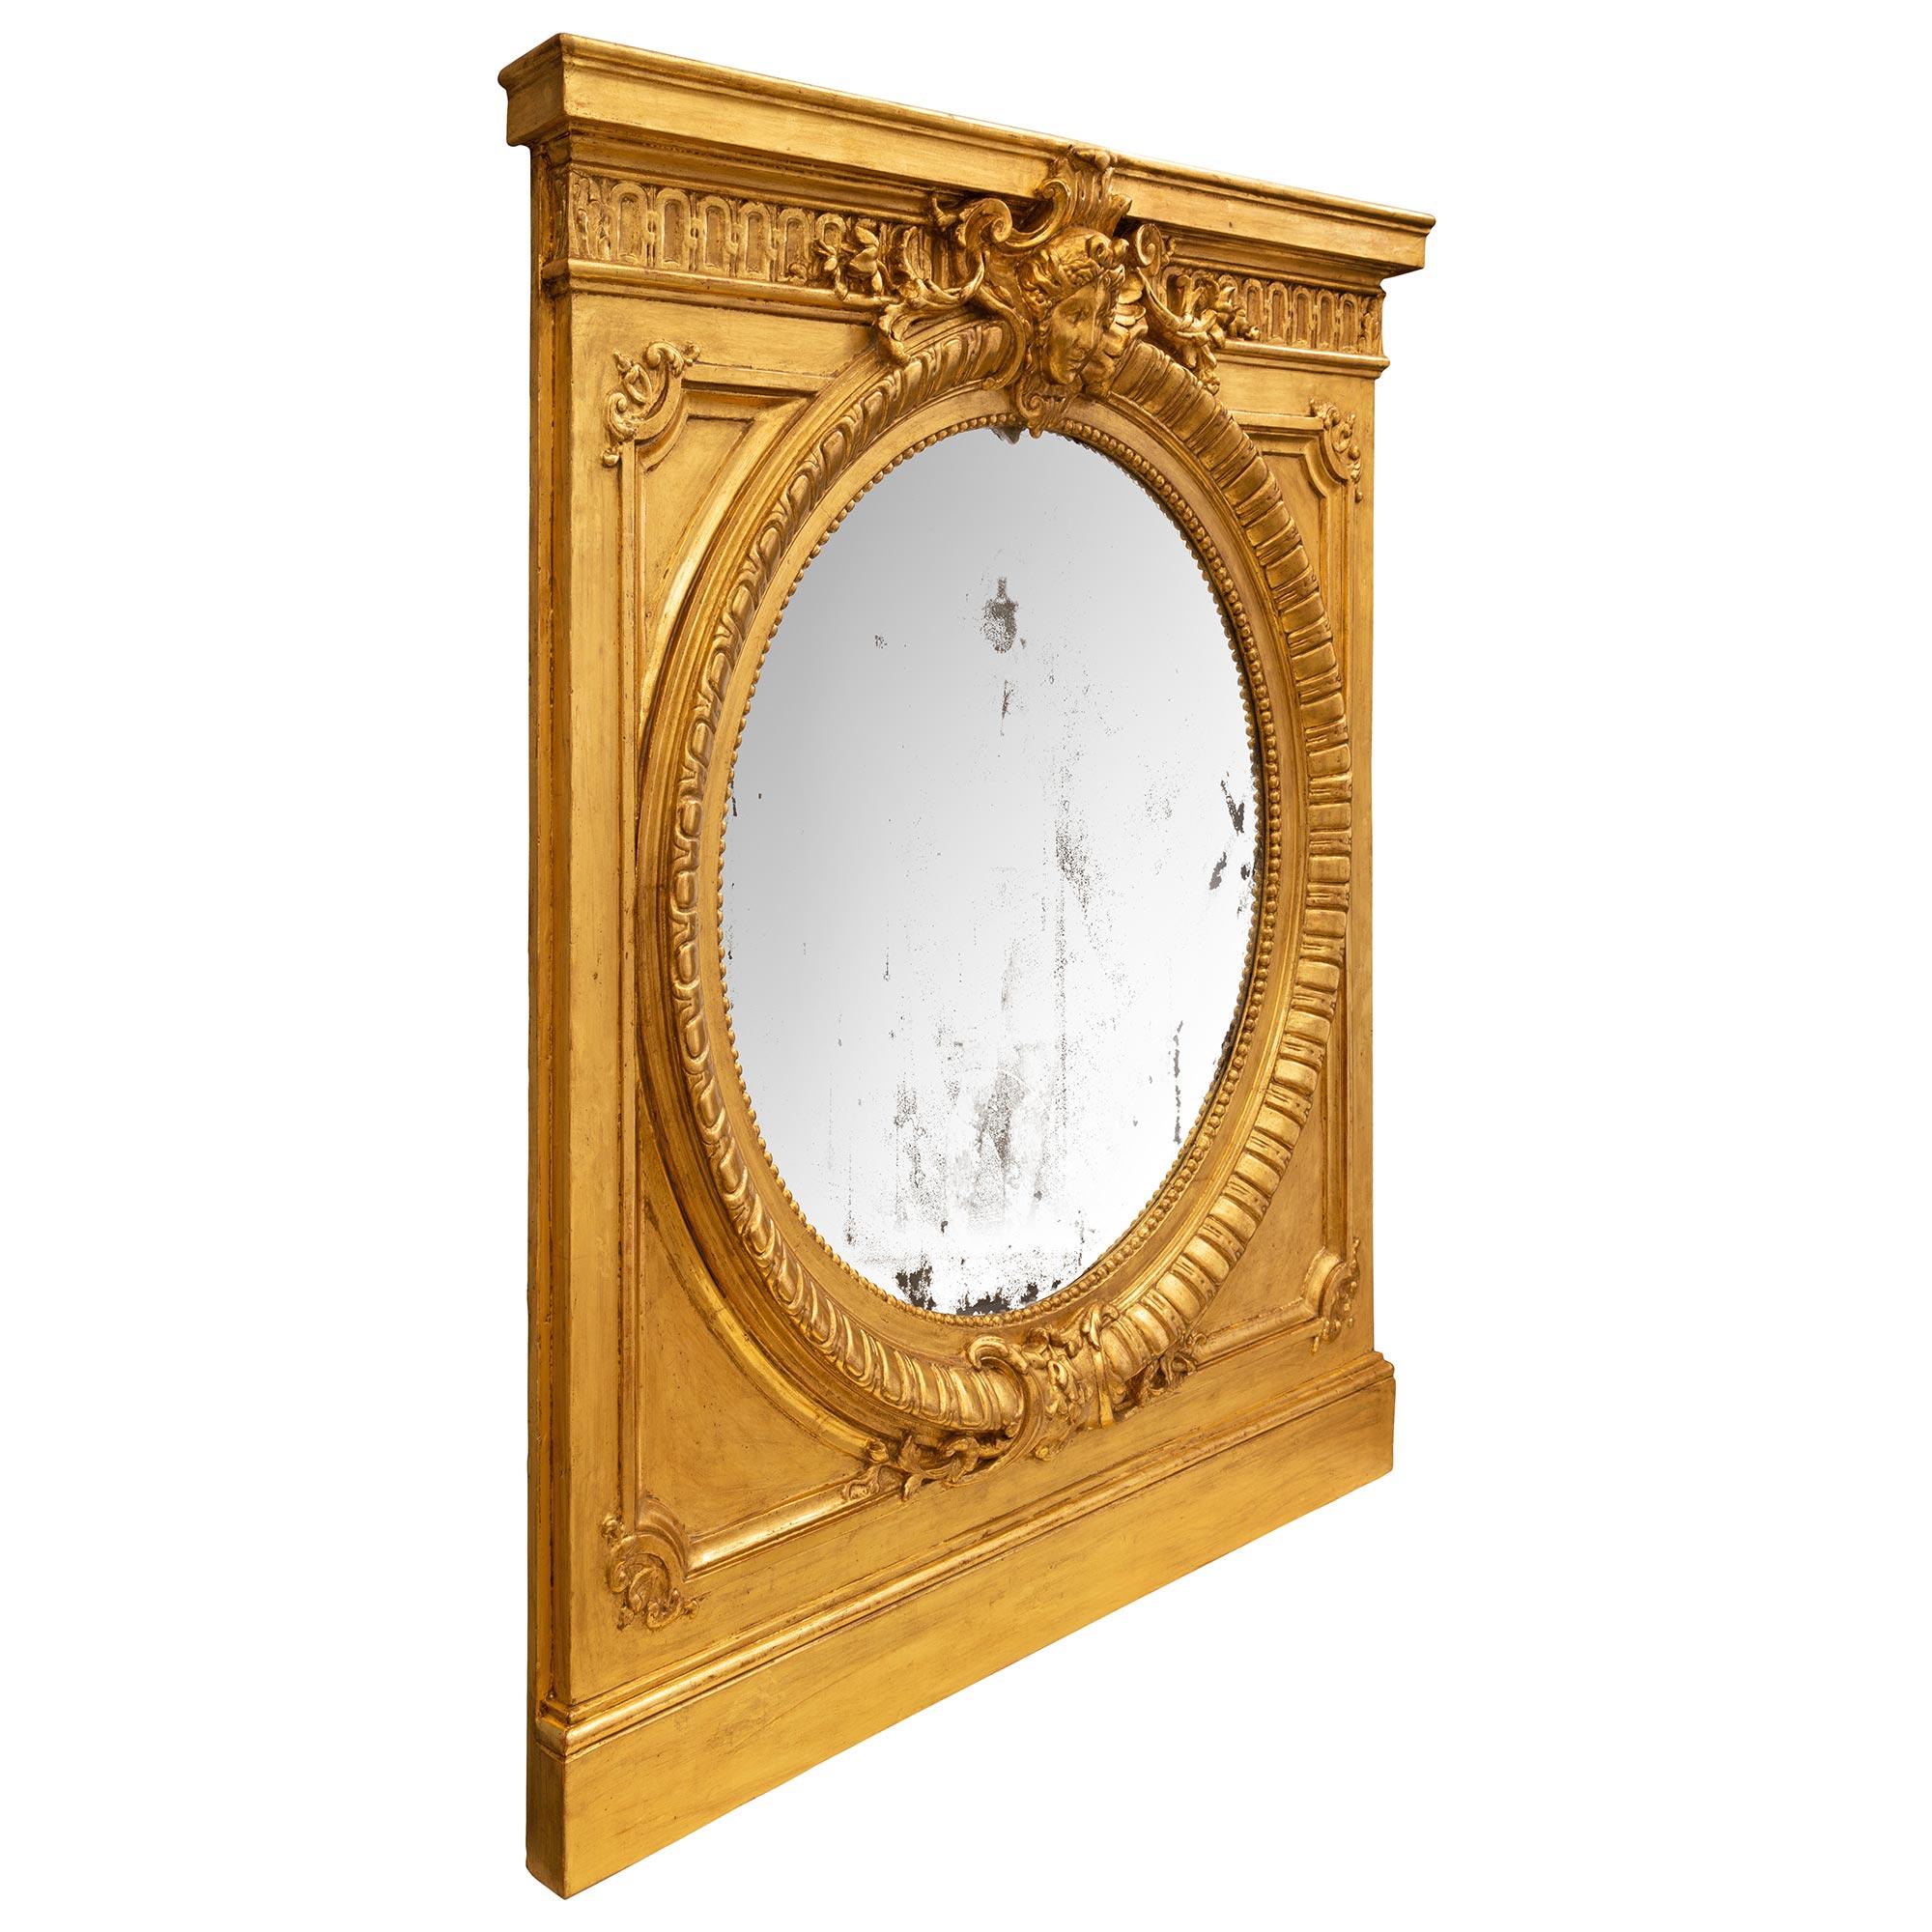 An elegant and extremely decorative French 19th century Louis XVI st. giltwood mirror. At the center is the original circular mirror plate framed within a fine beaded and mottled reeded border. The frame displays a straight base with a mottled